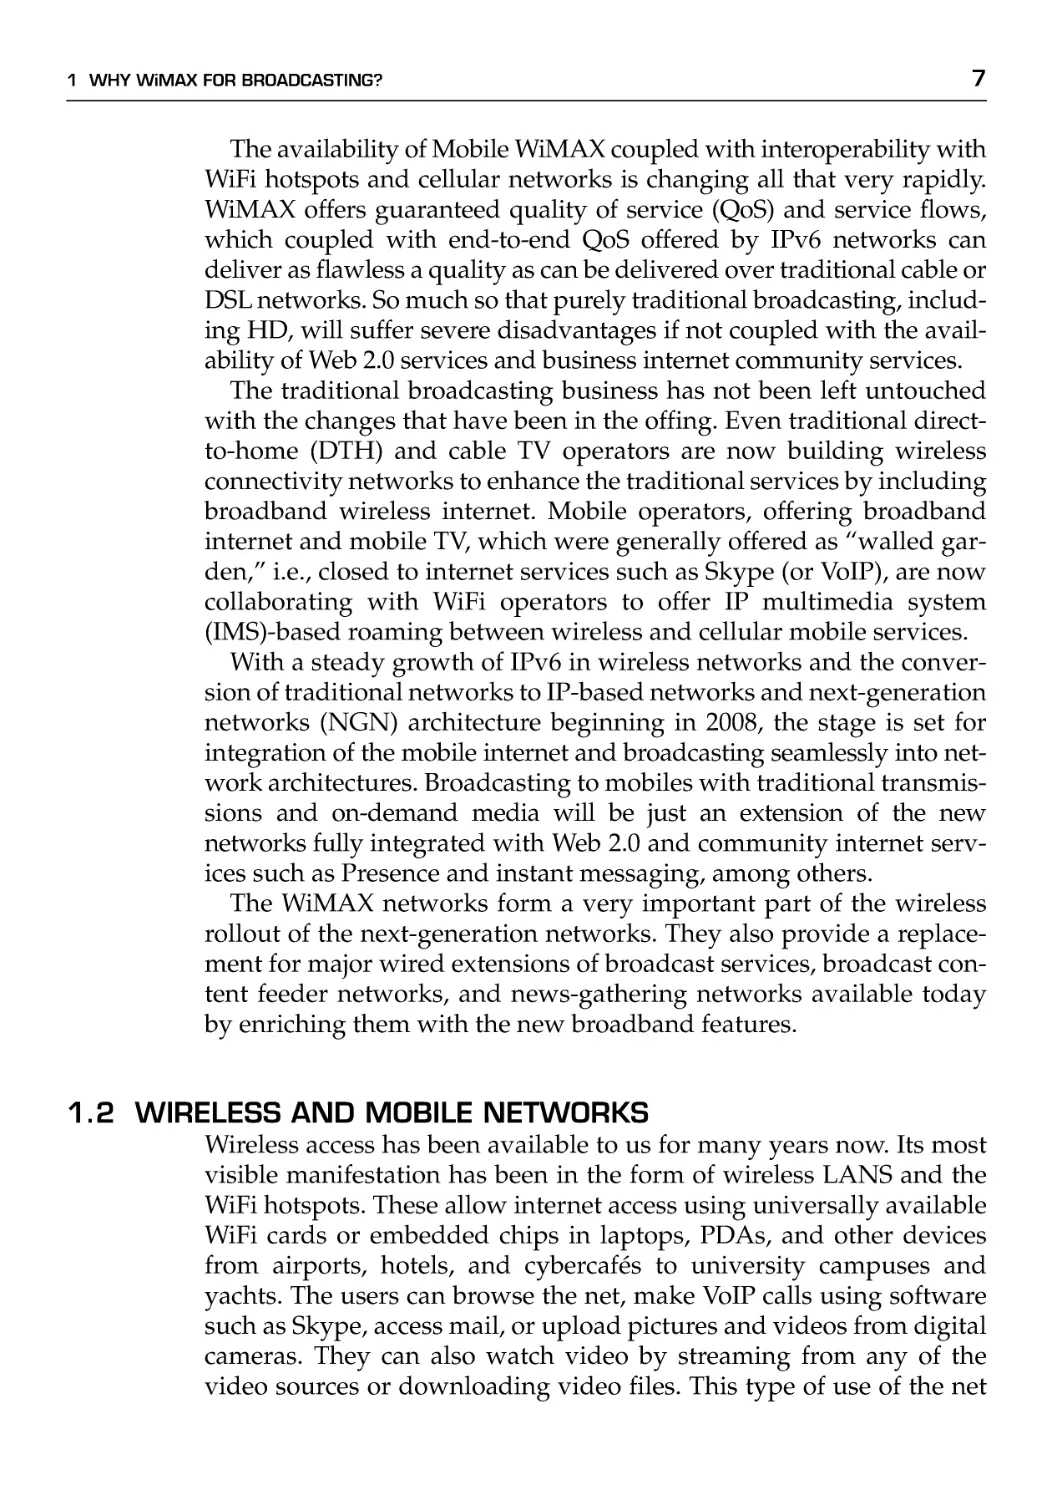 1.2 Wireless and Mobile Networks